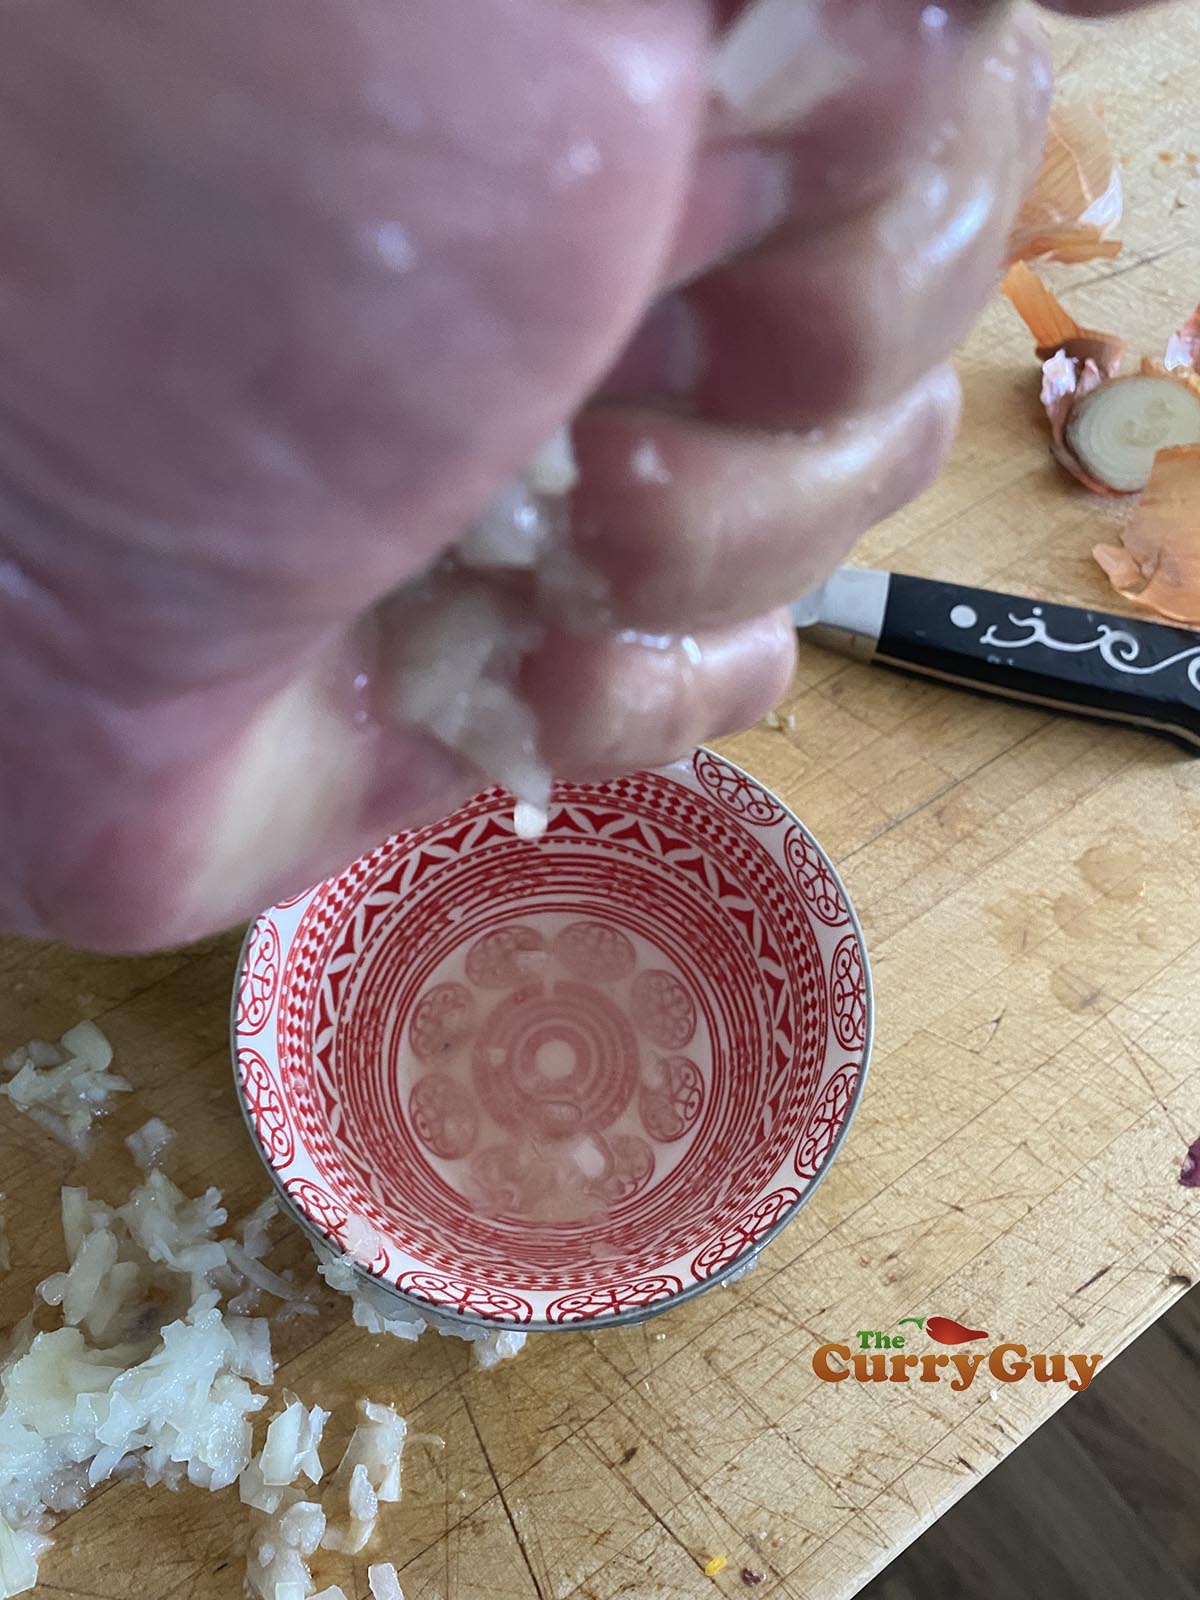 Squeezing moisture from onion.